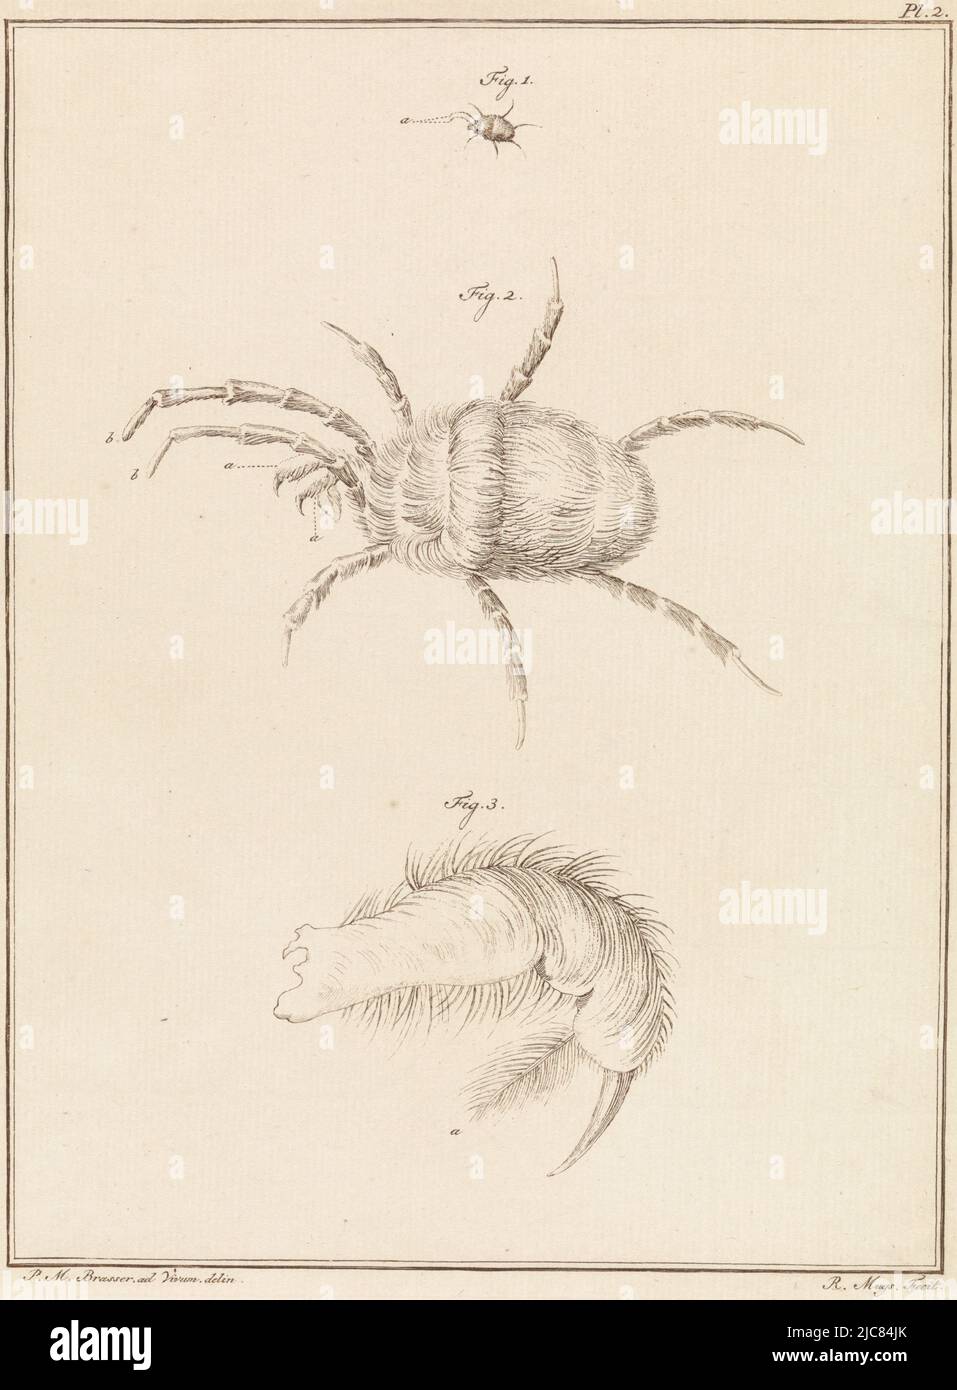 Images of a red spider, the Aranea Colorifera. One full size image, one enlargement of the spider and one enlargement of one of the sense bodies. Top right: Pl. 2. Print from a book on domestic and foreign land and aquatic animals. Red spider, print maker: Robbert Muys, (mentioned on object), intermediary draughtsman: P.M. Brasser, (mentioned on object), Rotterdam, 1778, paper, etching, h 217 mm × w 165 mm Stock Photo